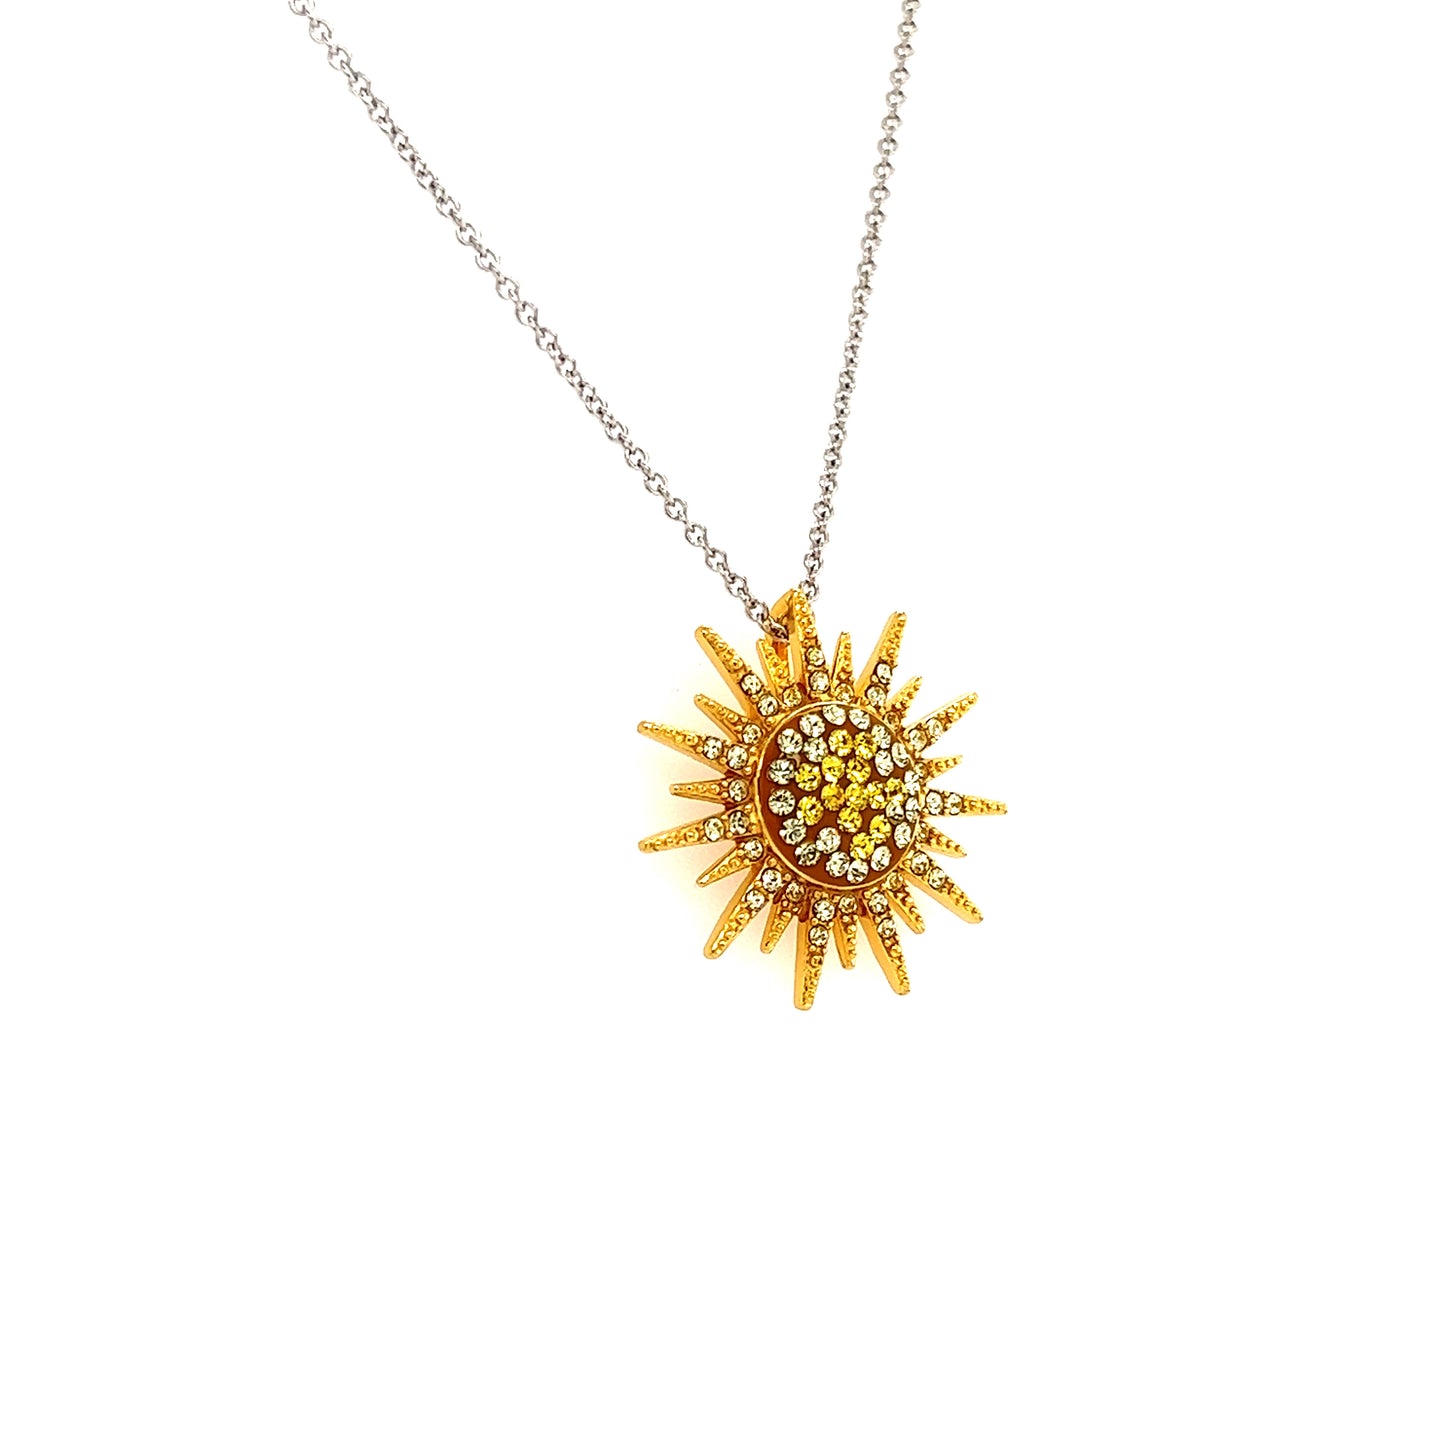 Sunburst Necklace With Yellow and White Crystals in Sterling Silver Left Side View